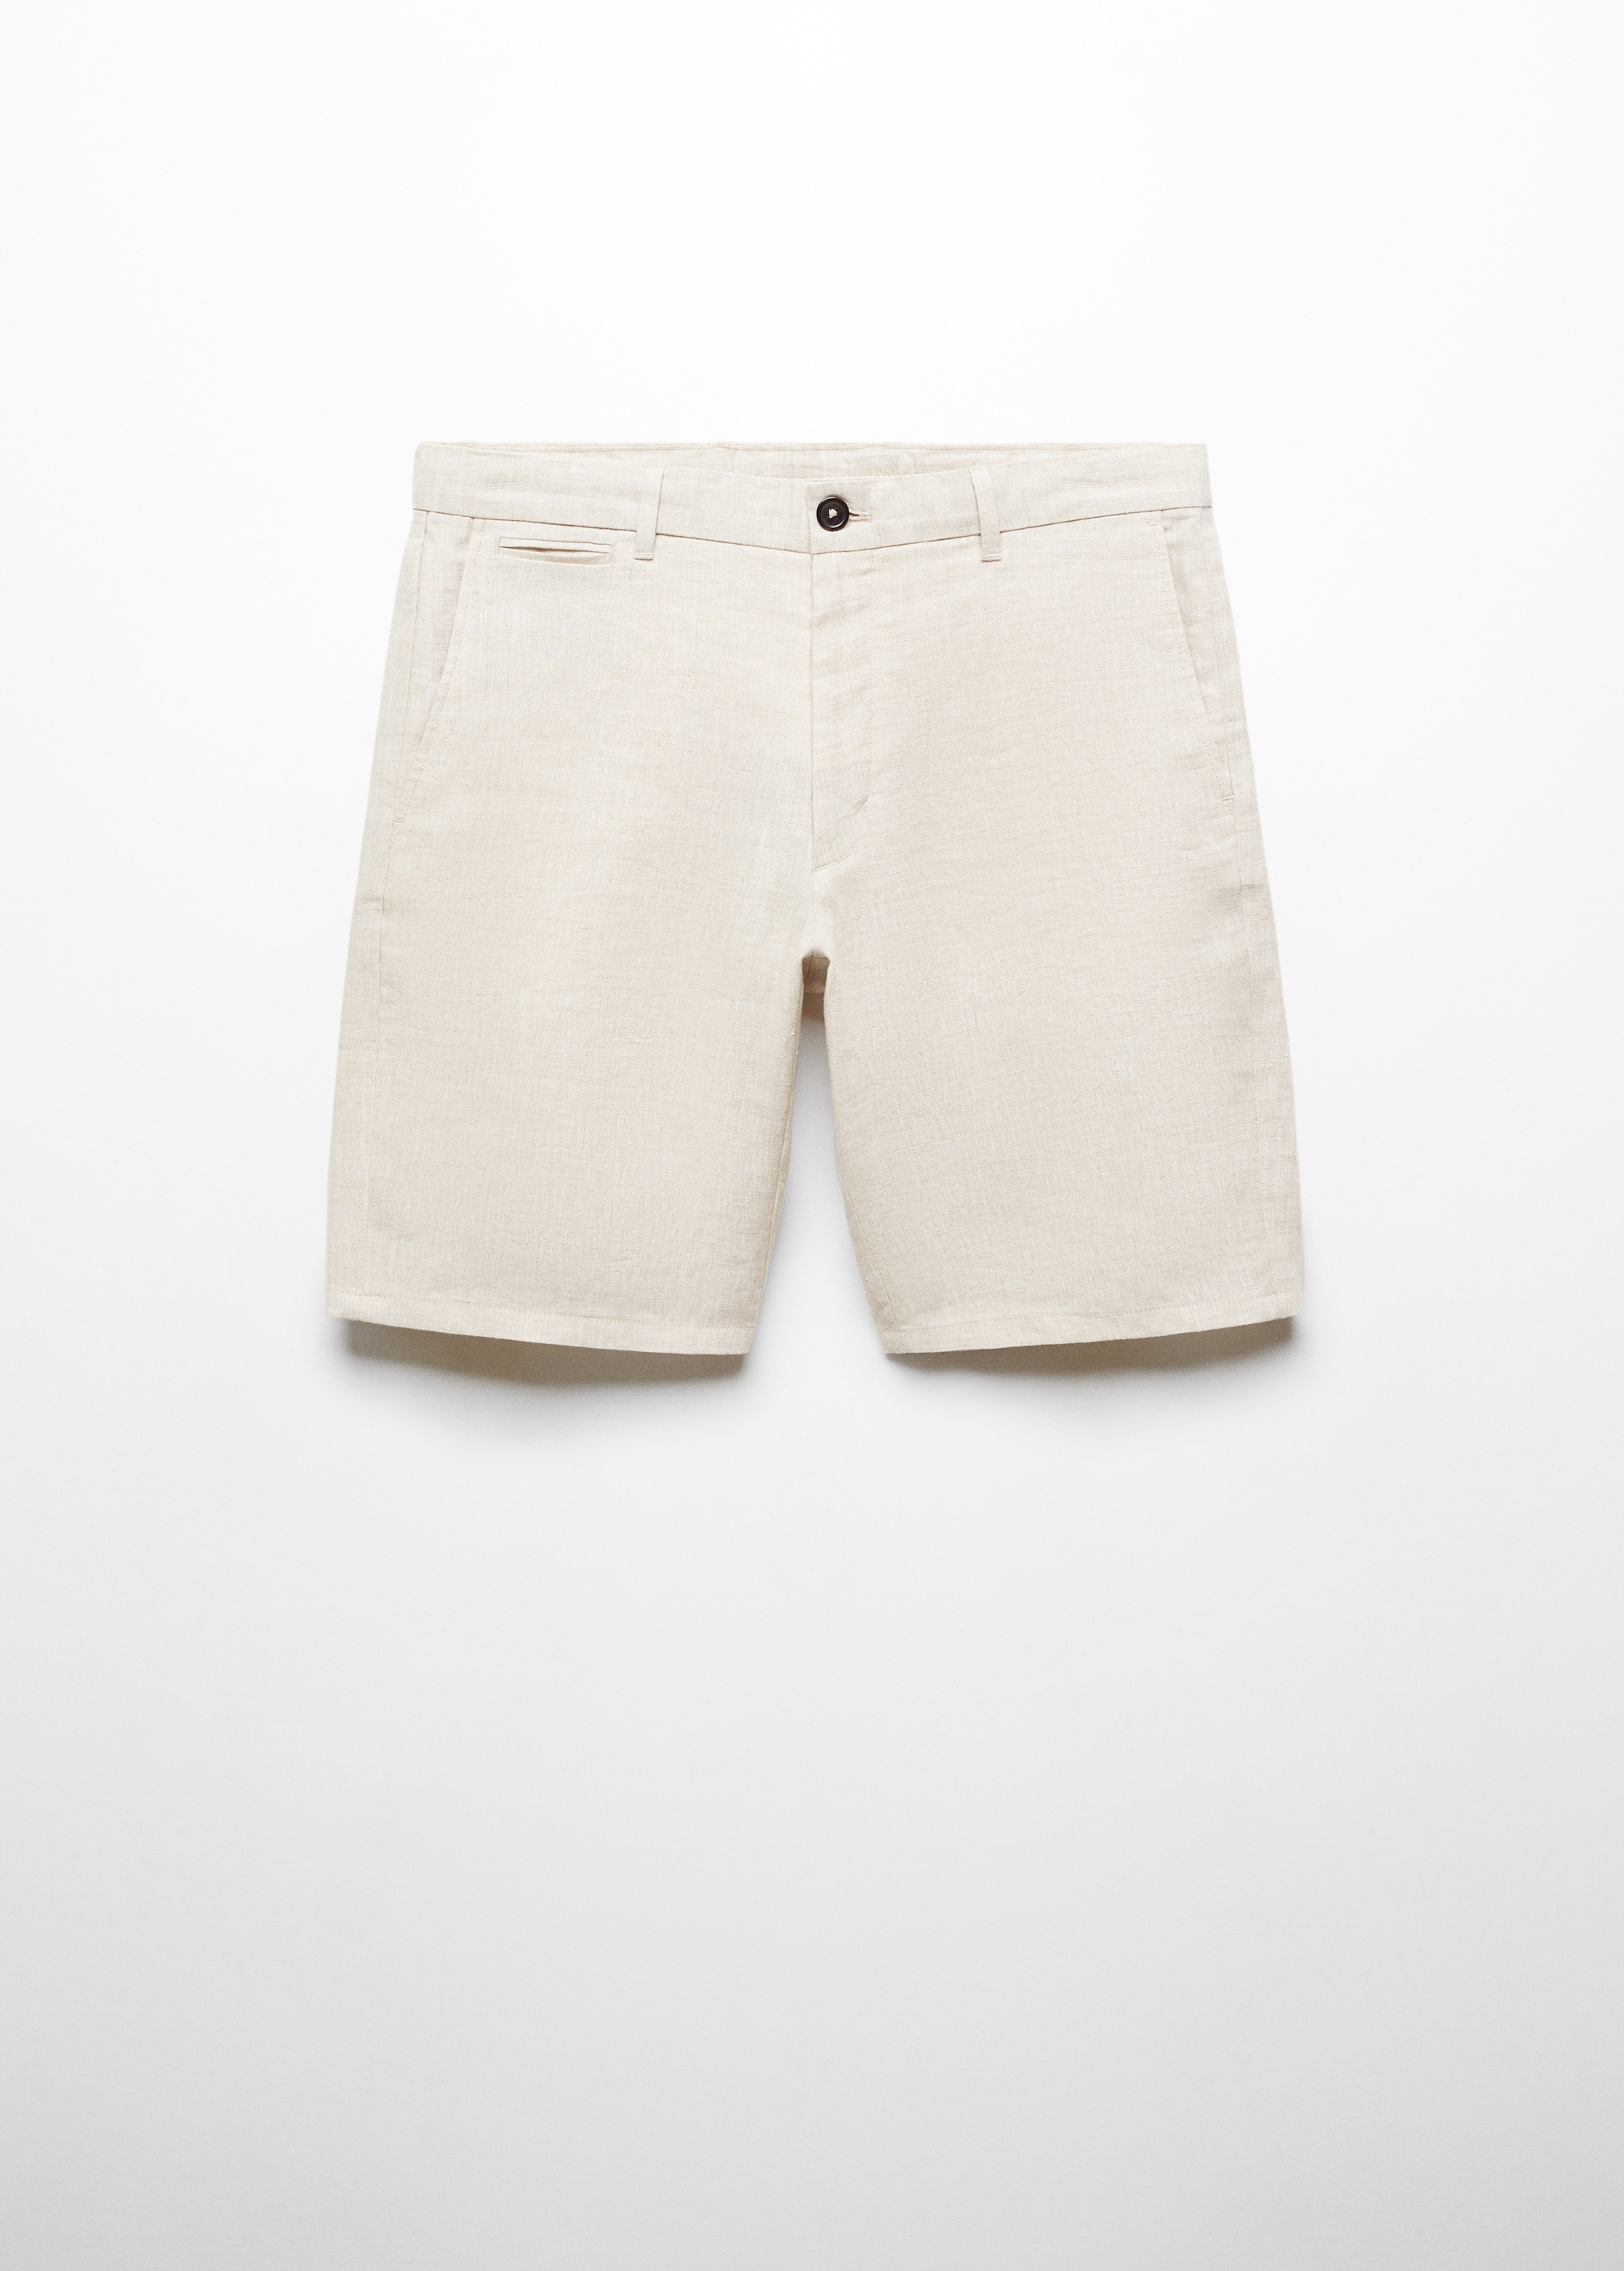 Slim fit 100% linen Bermuda shorts - Article without model